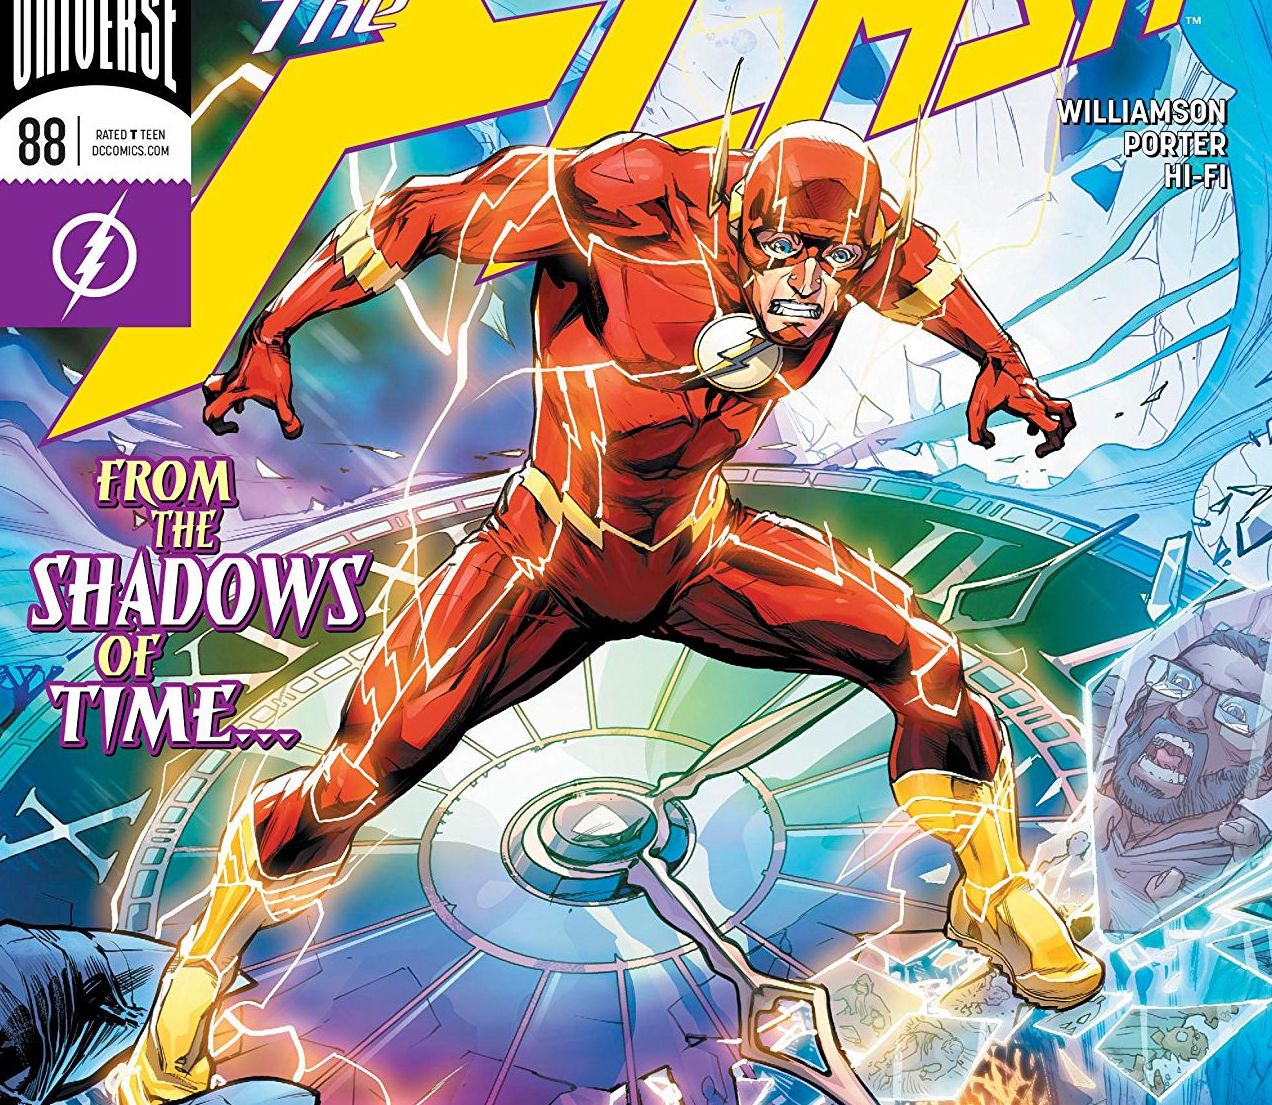 The Flash #88 Review